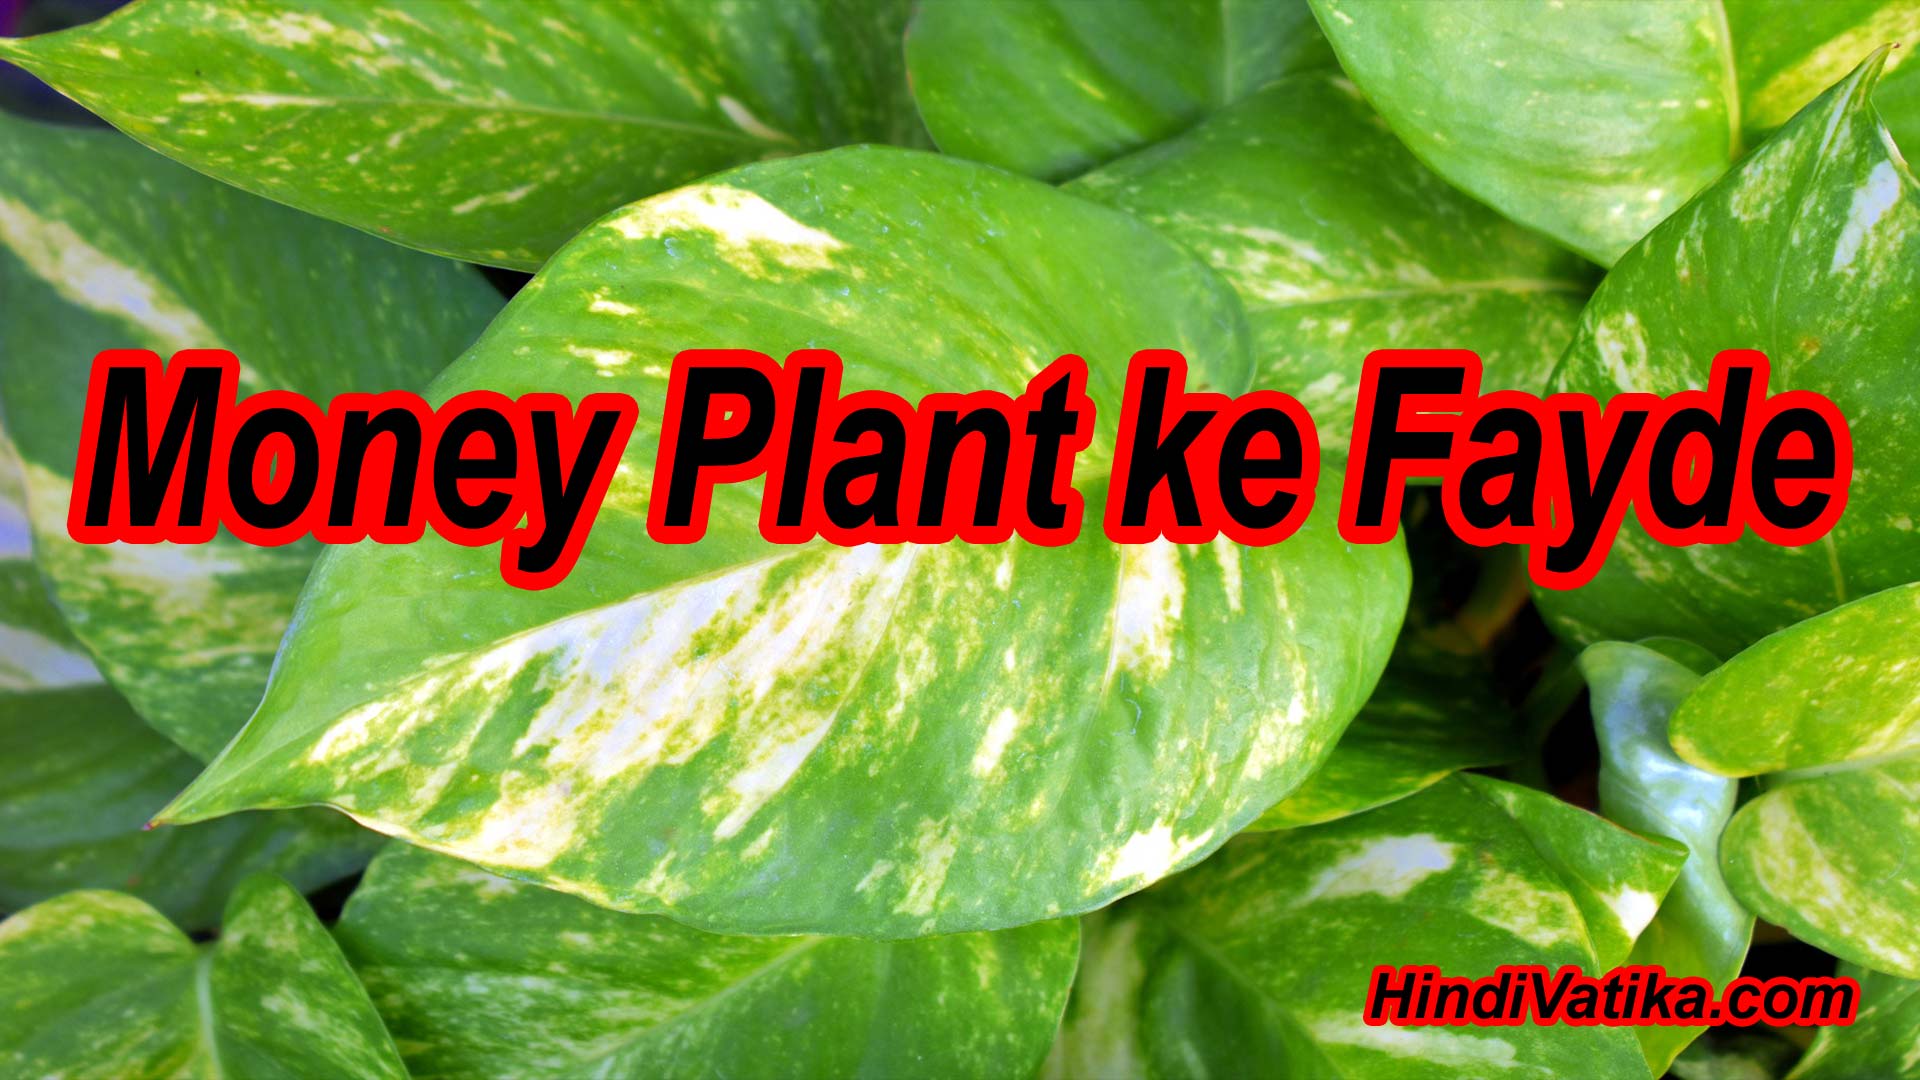 à¤®à¤¨ à¤ª à¤² à¤Ÿ à¤• à¤« à¤¯à¤¦ Benefits Of Money Mani Plant In Hindi Uses Care